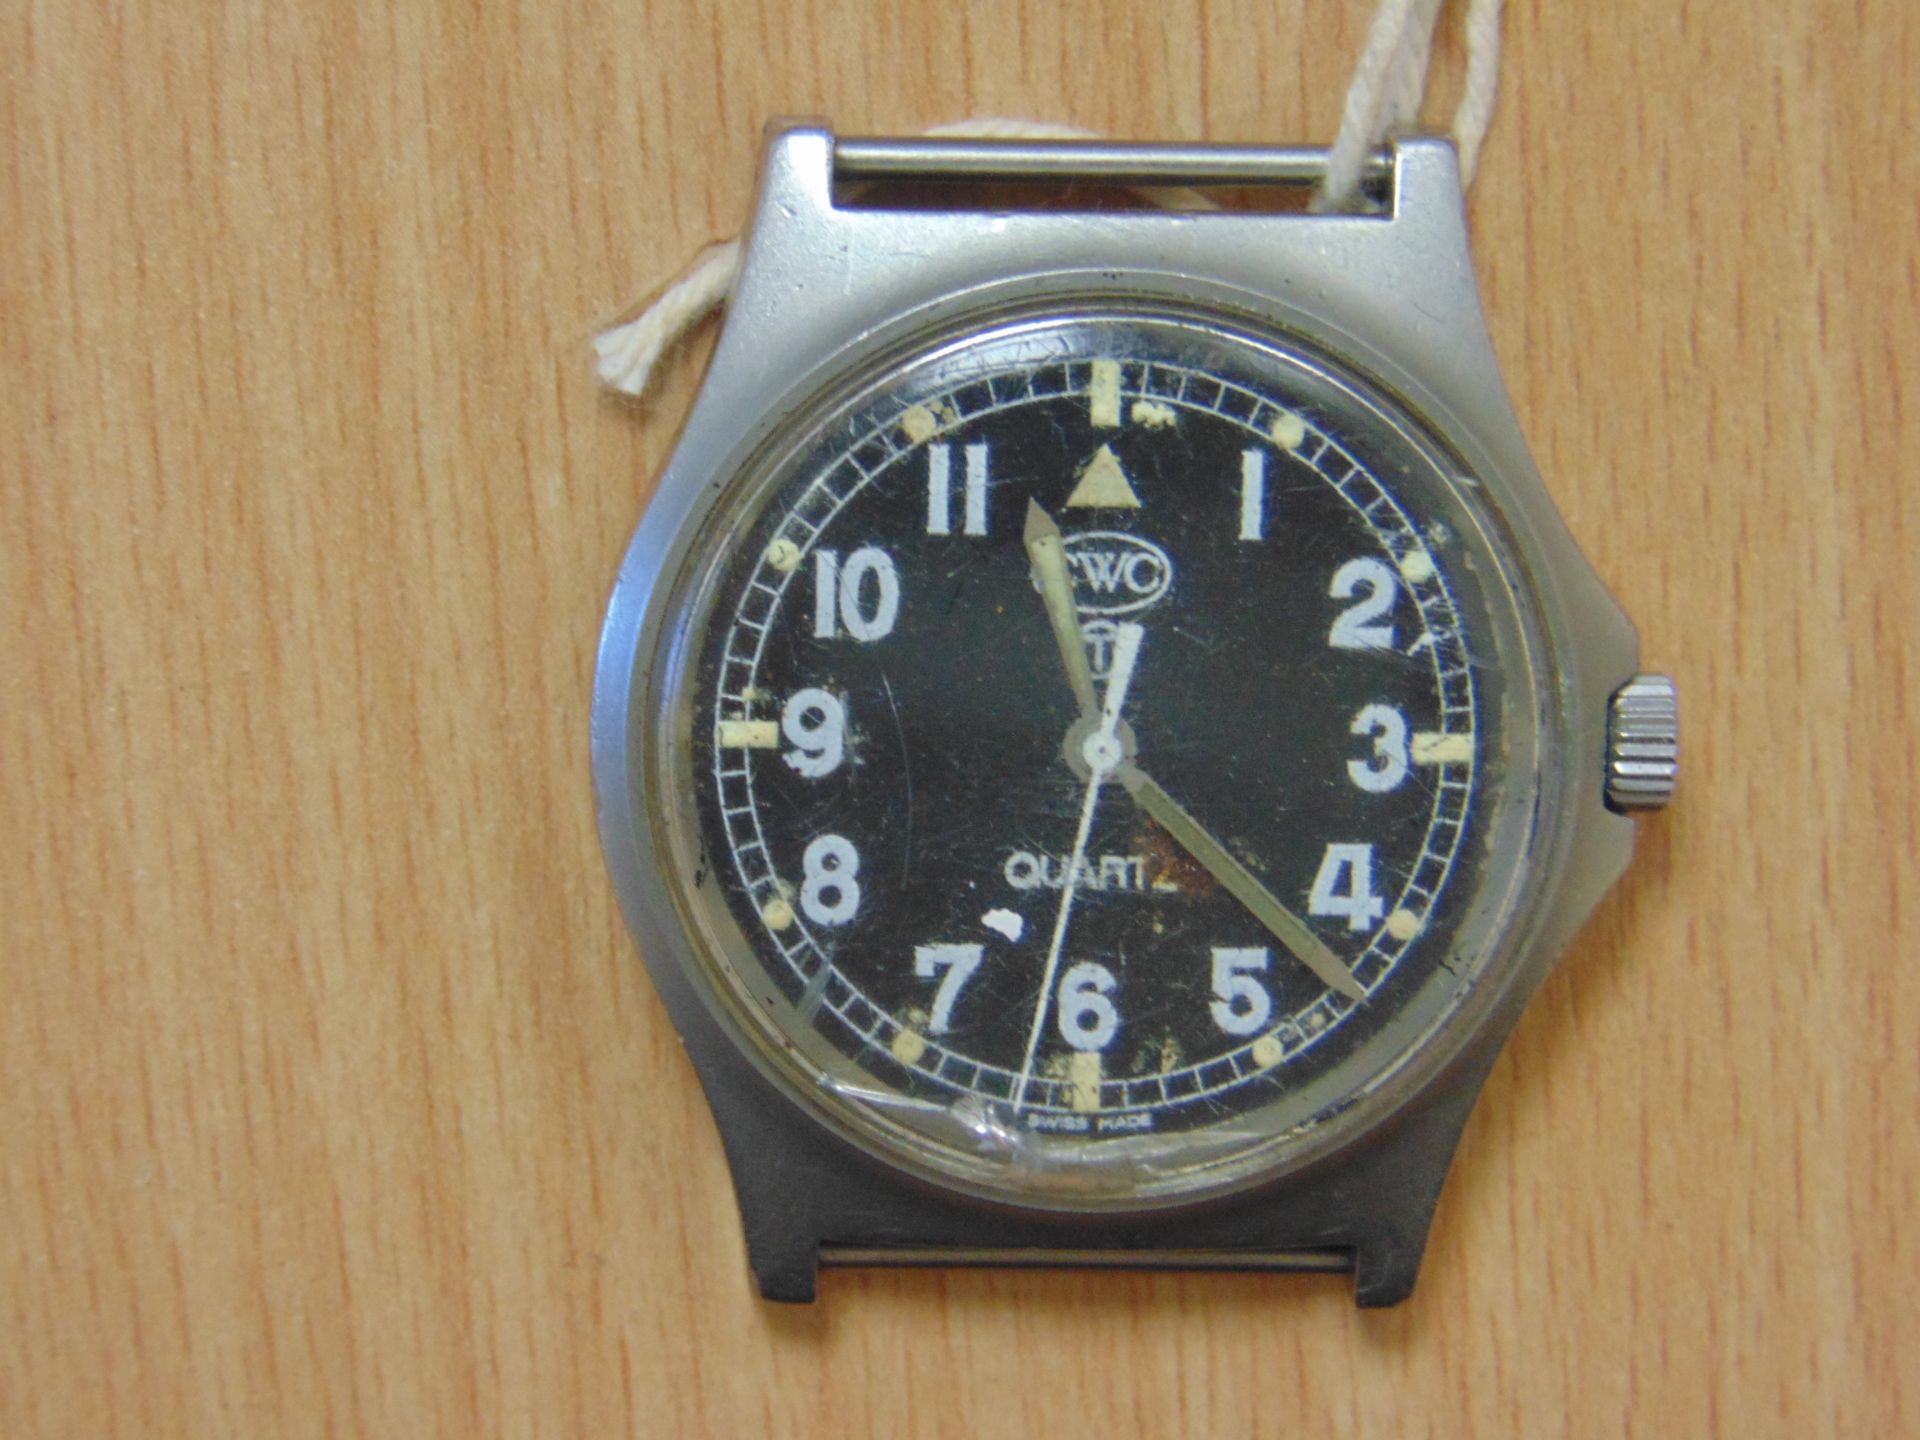 2X CWC W10 SERVICE WATCHES NATO NUMBERS DATE 1997 - Image 5 of 9